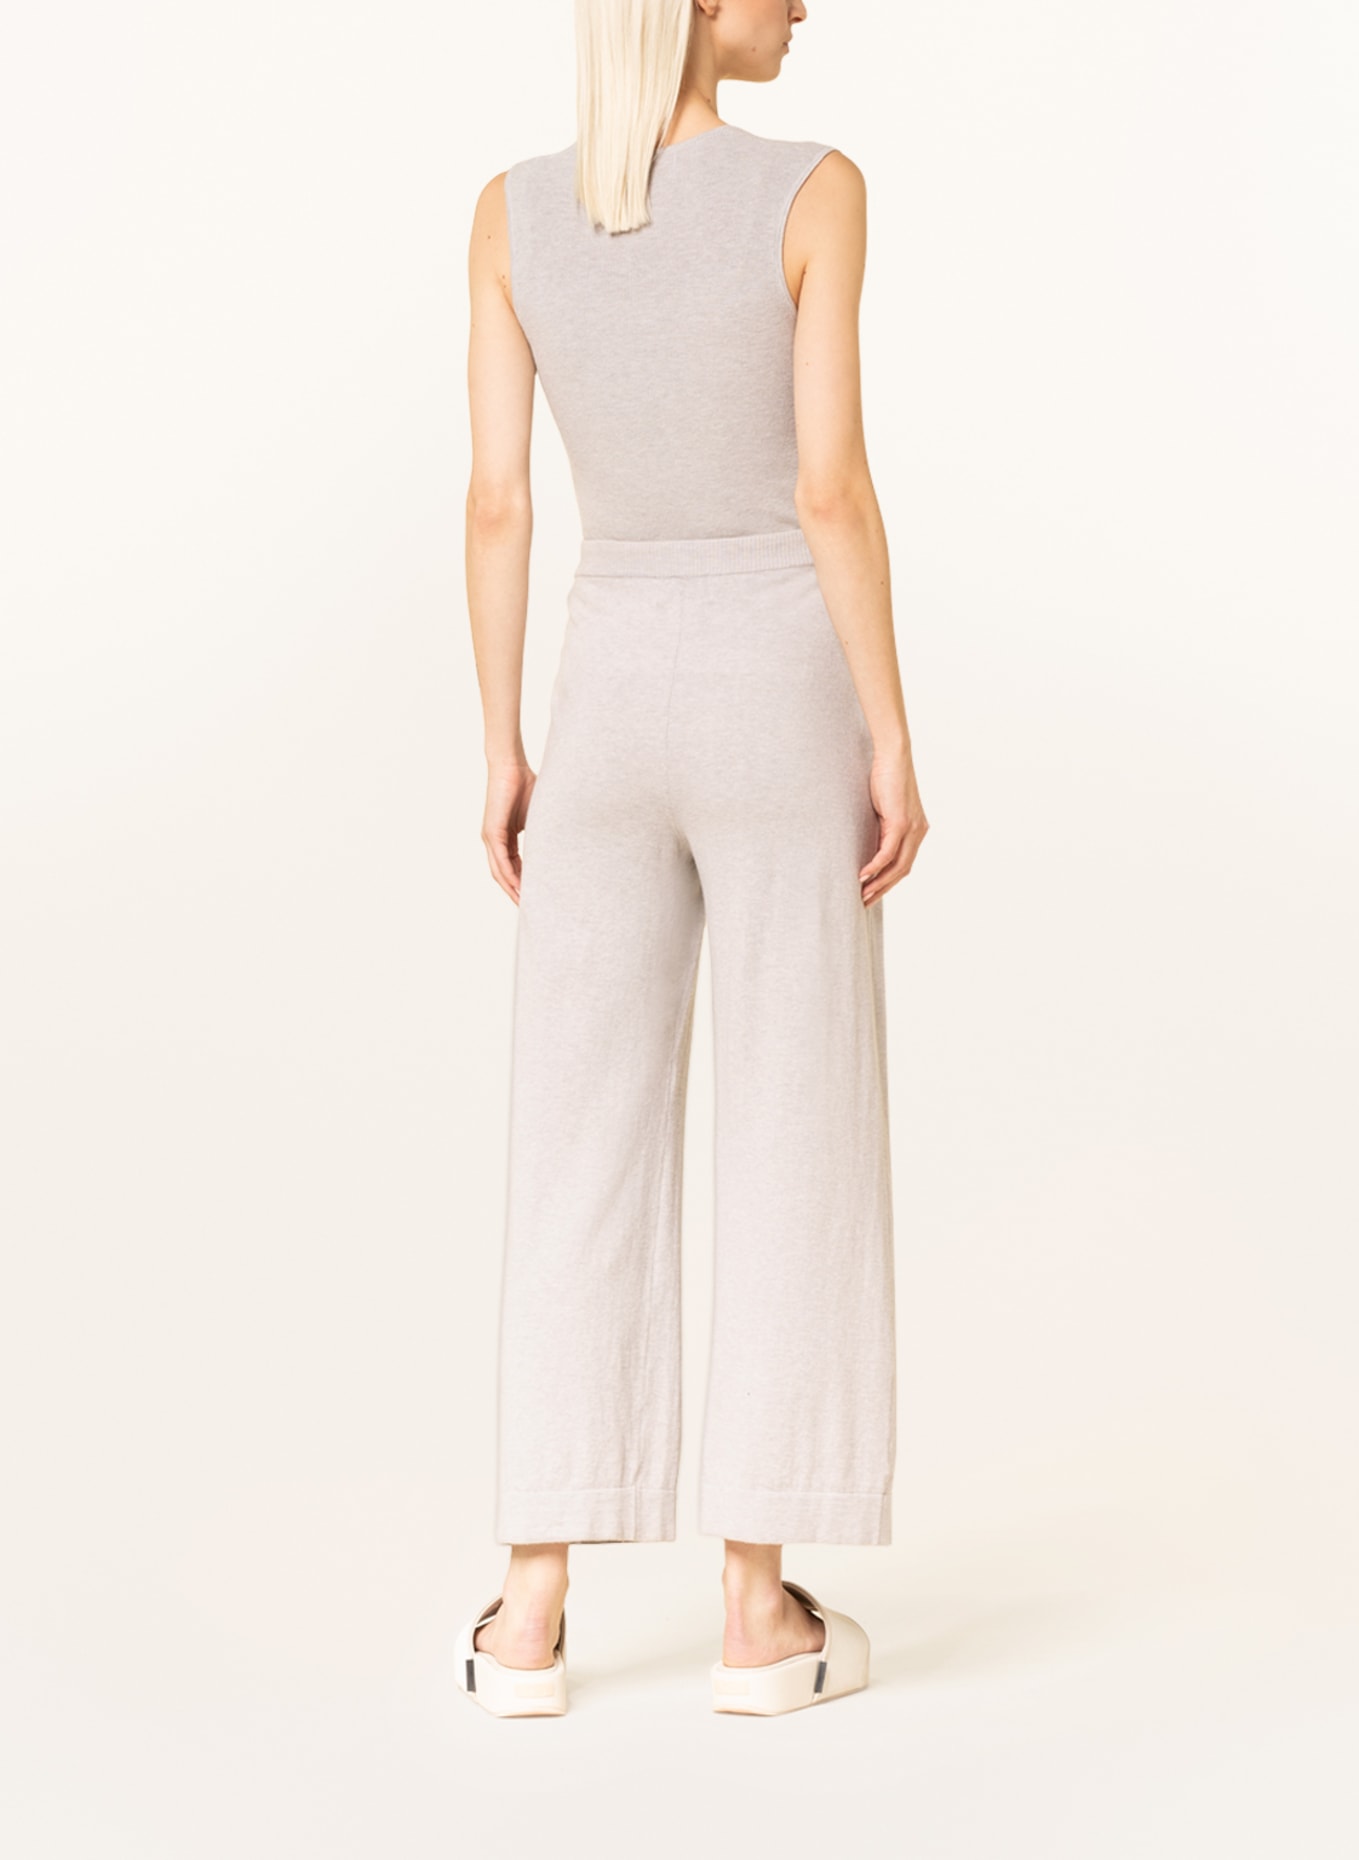 GITTA BANKO Knit trousers in jogger style with cashmere, Color: LIGHT GRAY (Image 3)